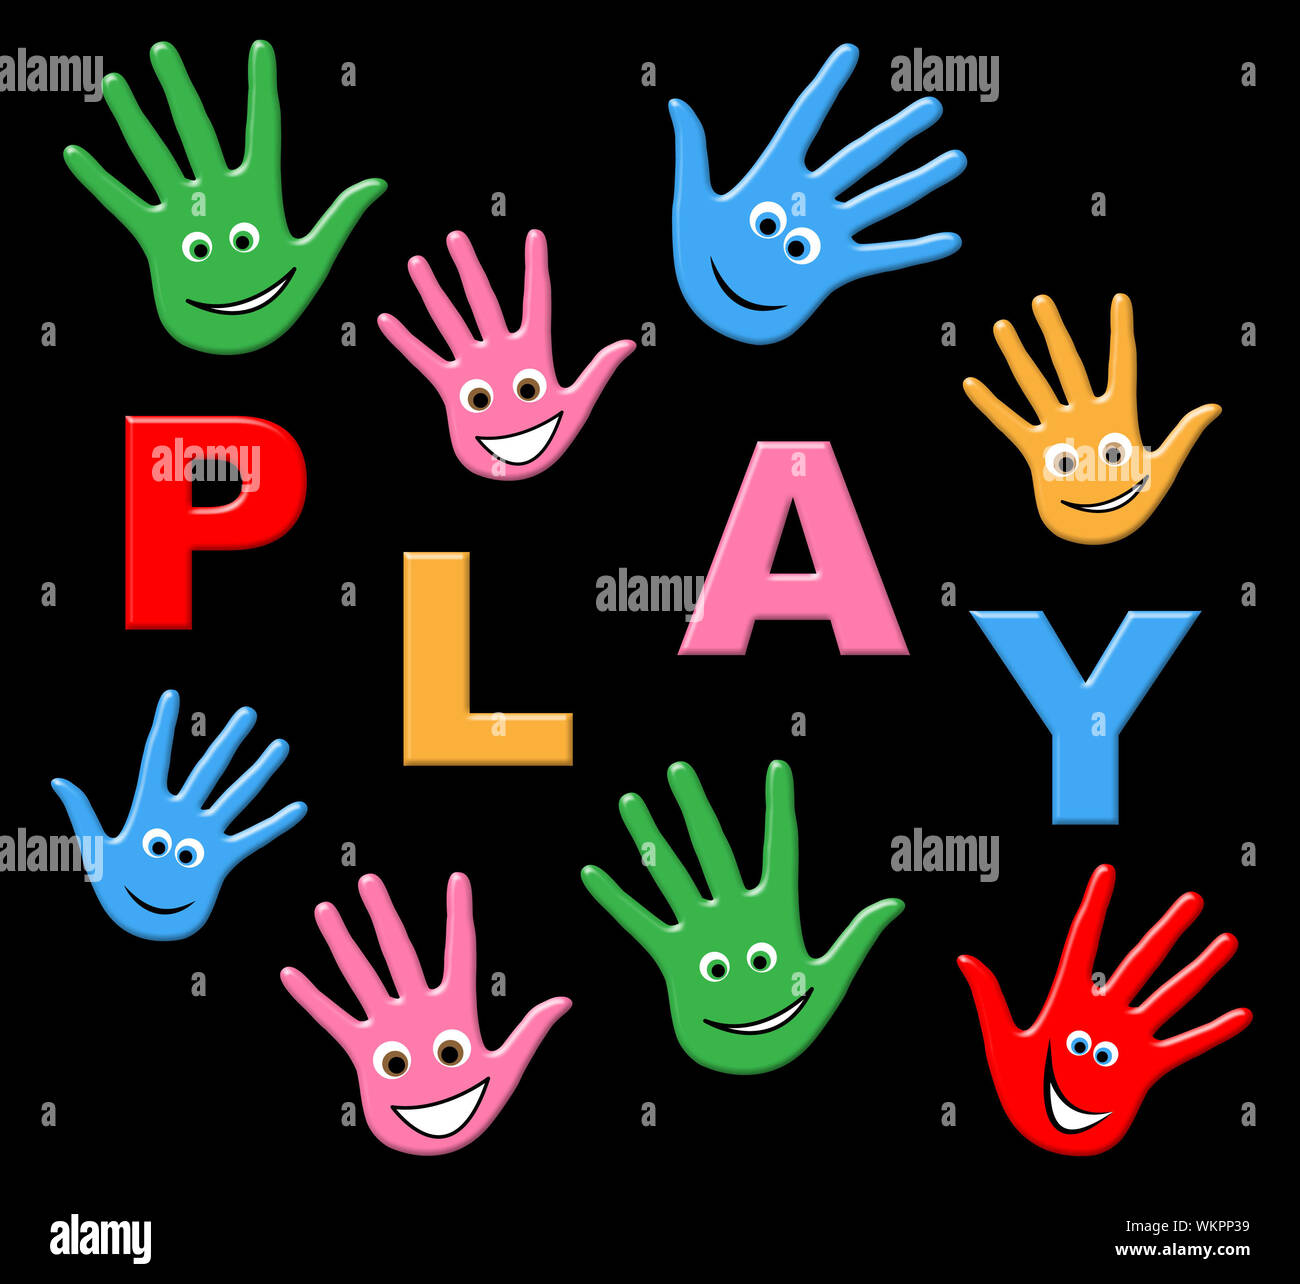 Playing Play Meaning Free Time And Youngsters Stock Photo, Picture